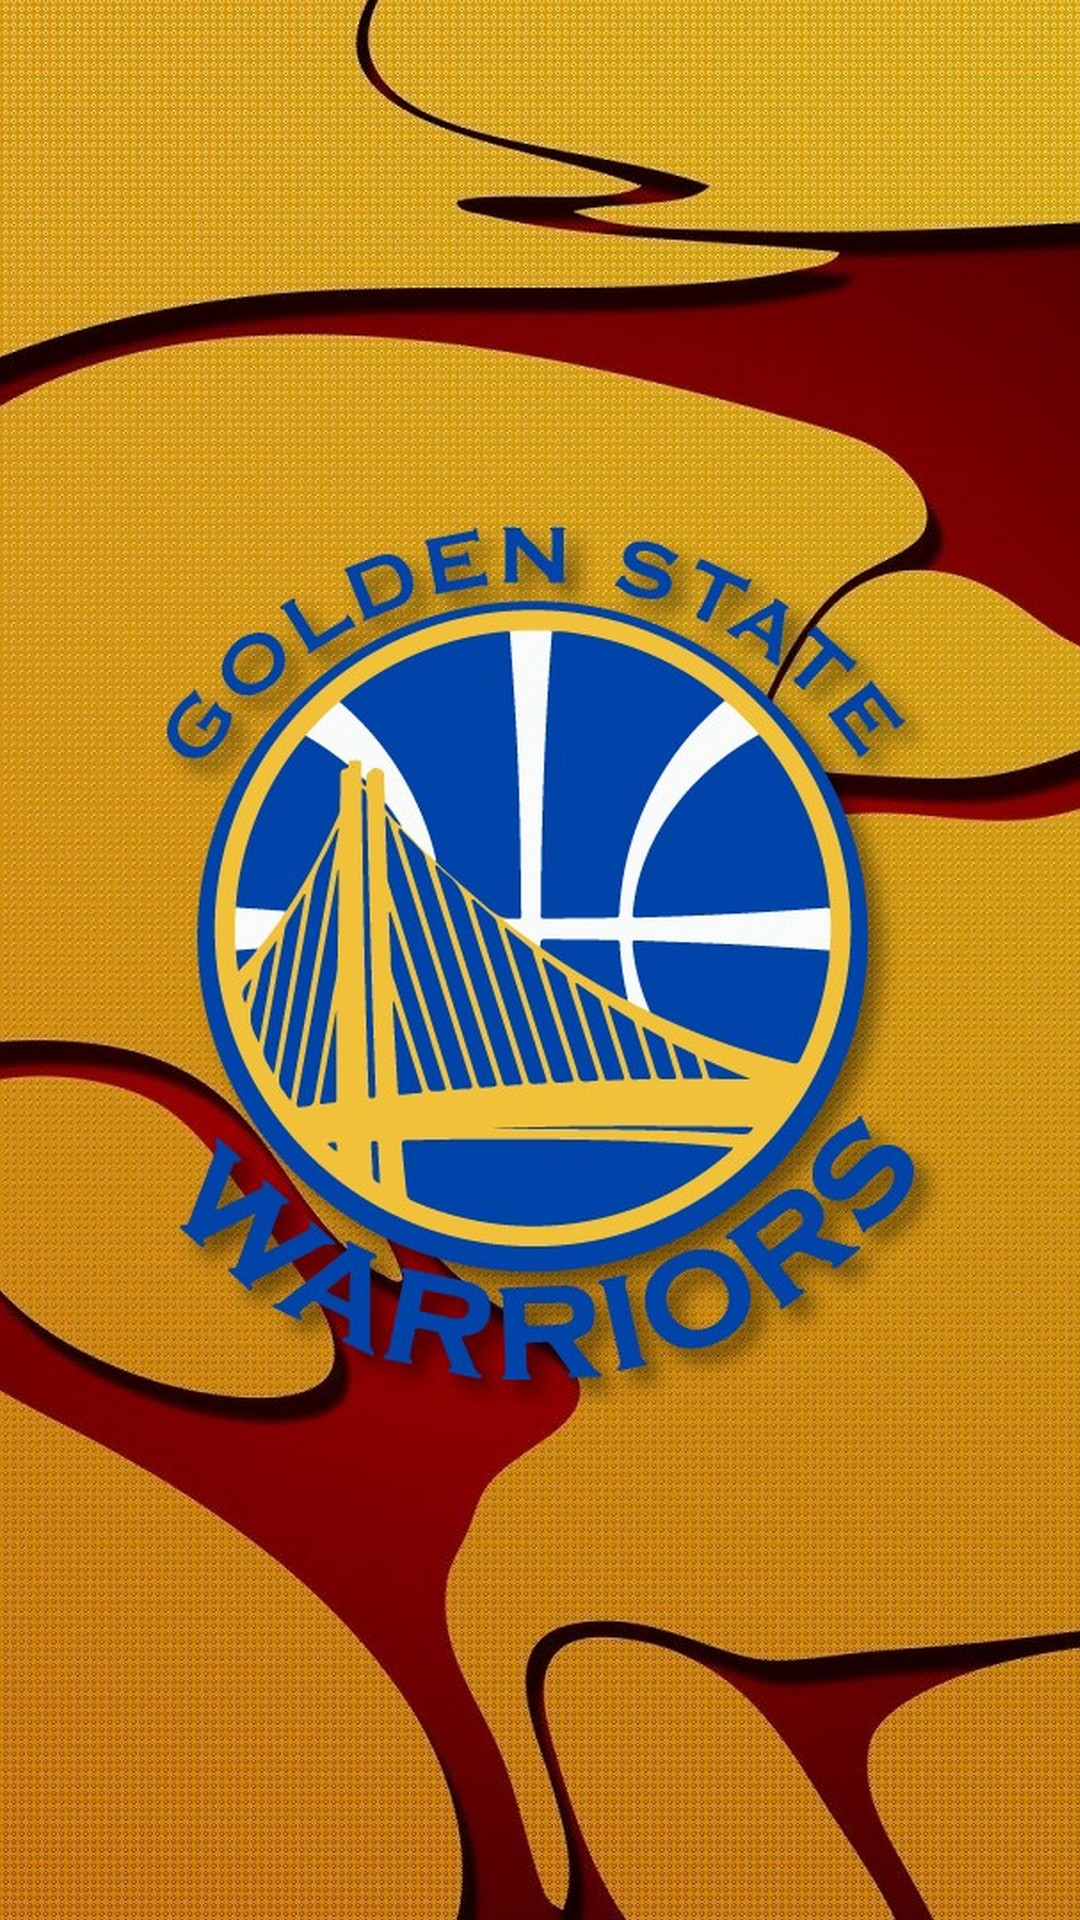 Android Wallpaper Hd Golden State Warriors With Image - Golden State Warriors Wallpaper 2019 - HD Wallpaper 